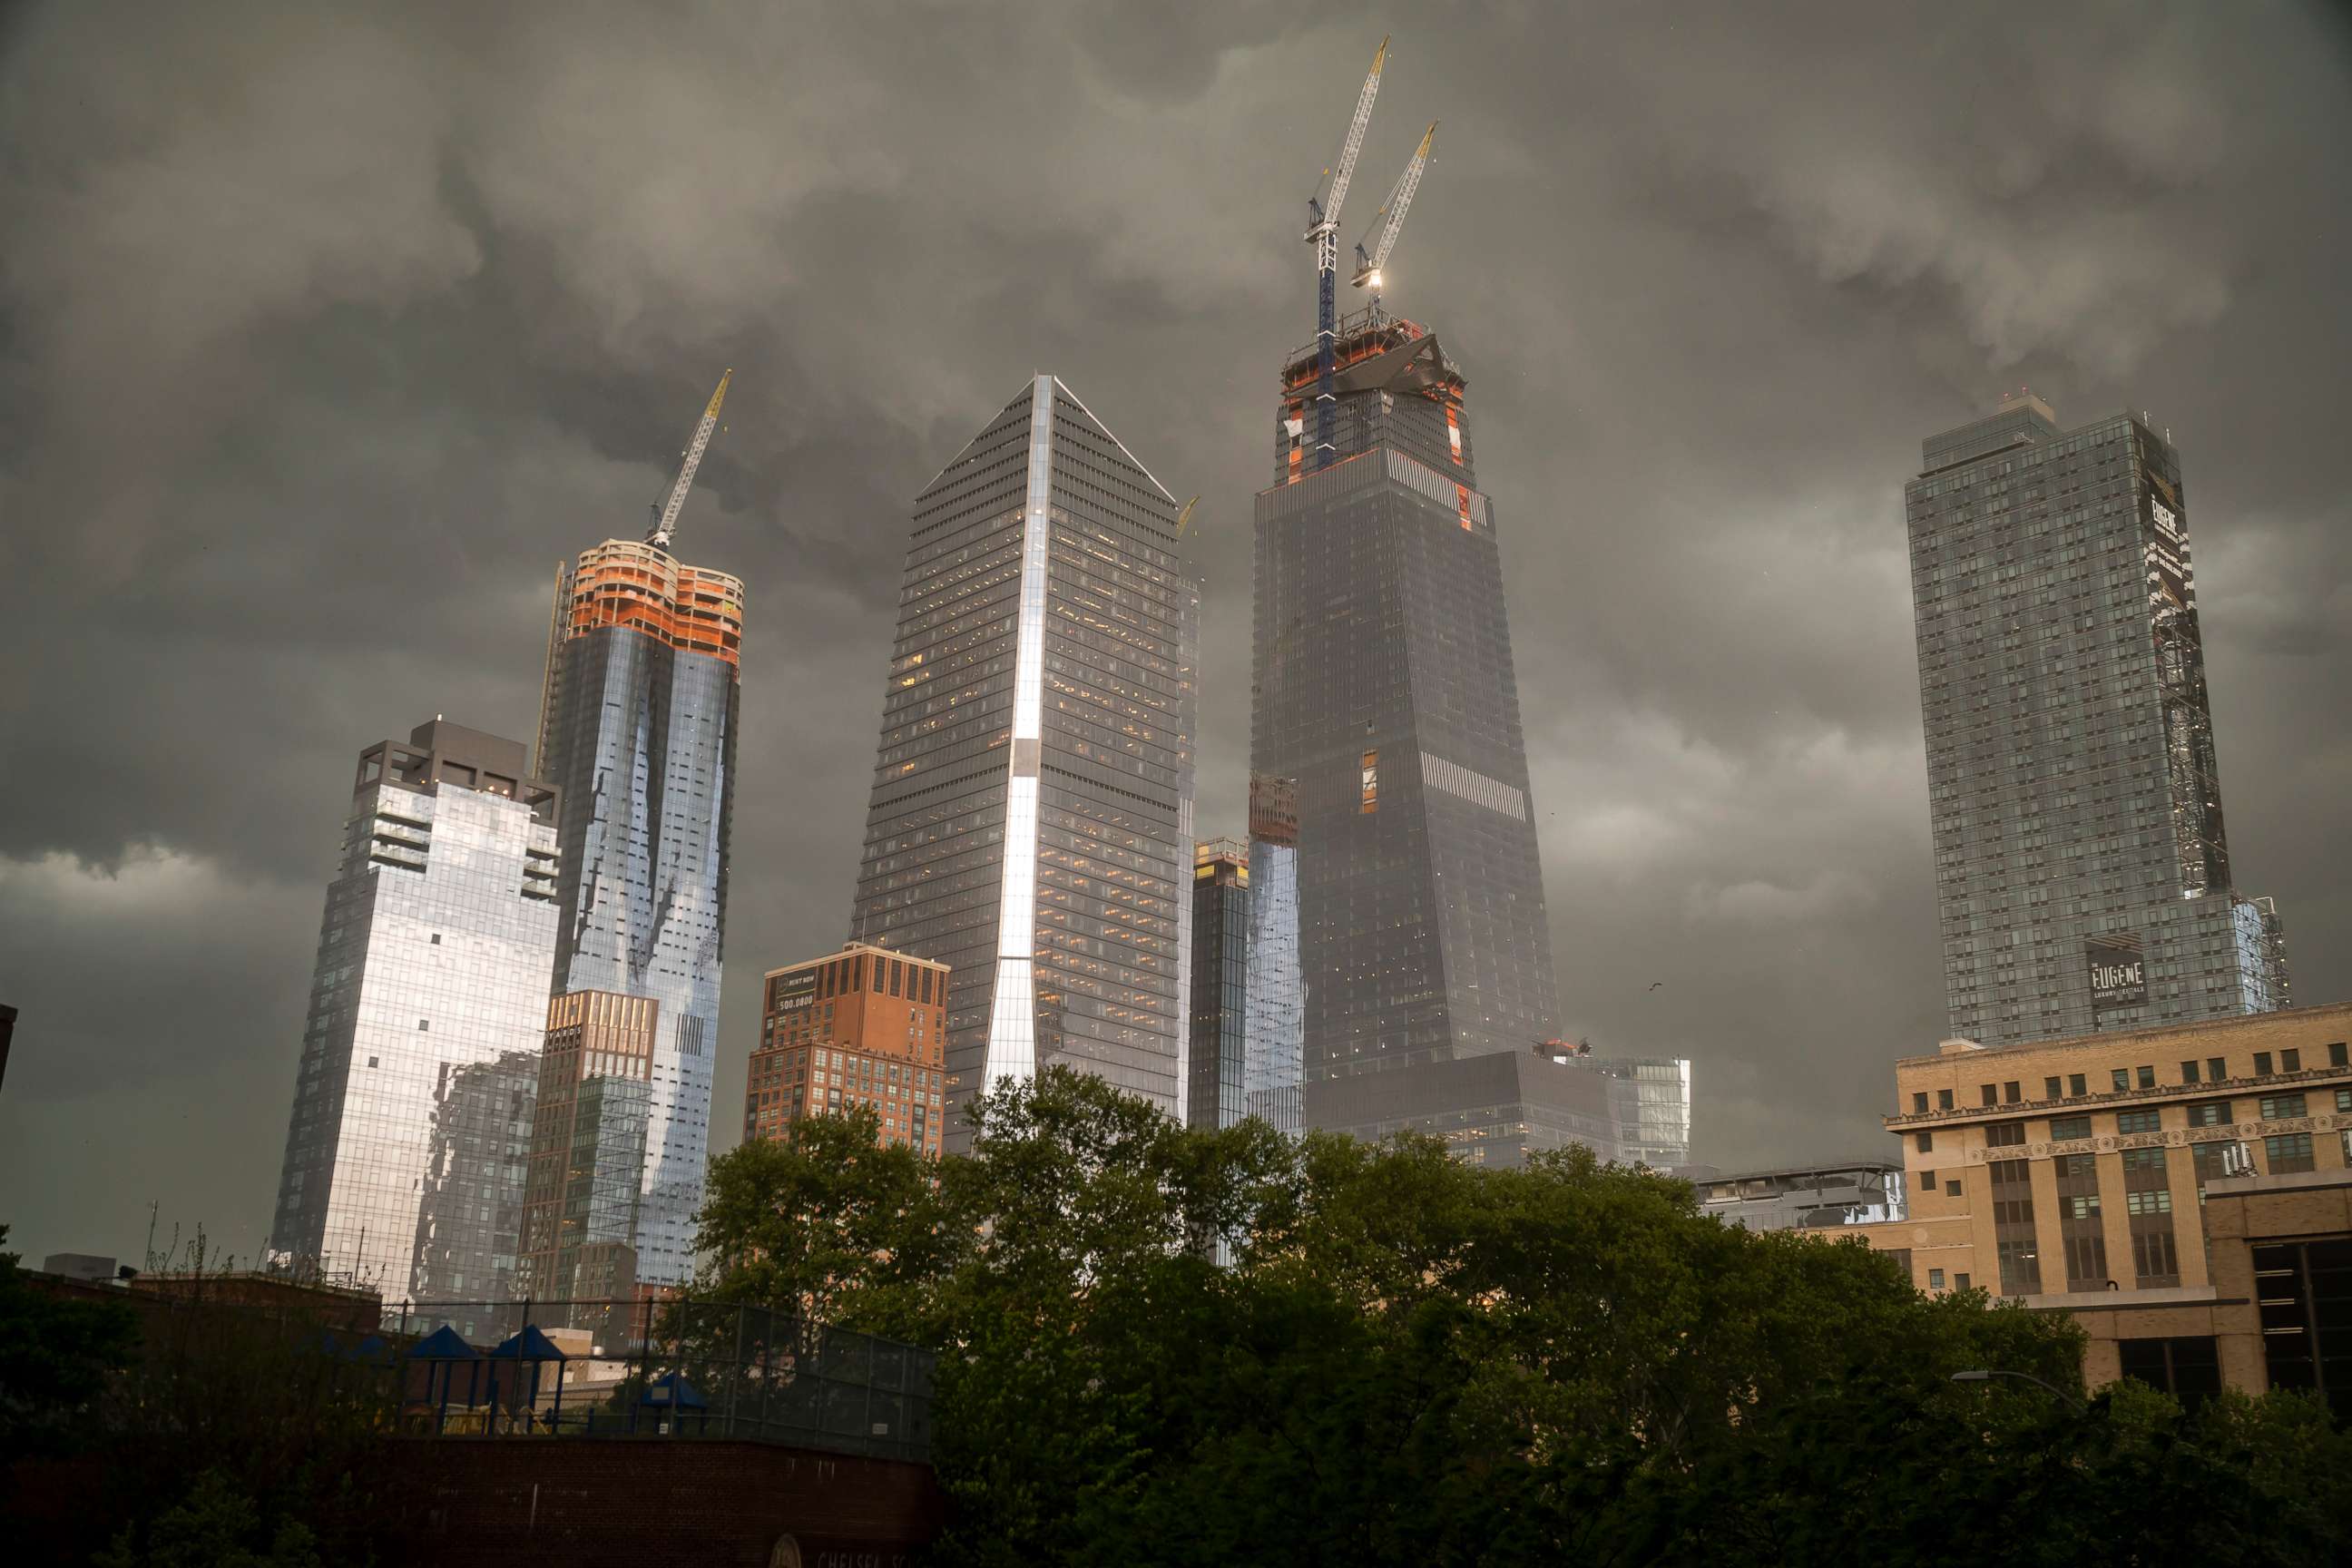 PHOTO: The Hudson Yards development on the west side of Manhattan in New York is seen as a fast moving storm passes through the city, May 15, 2018.